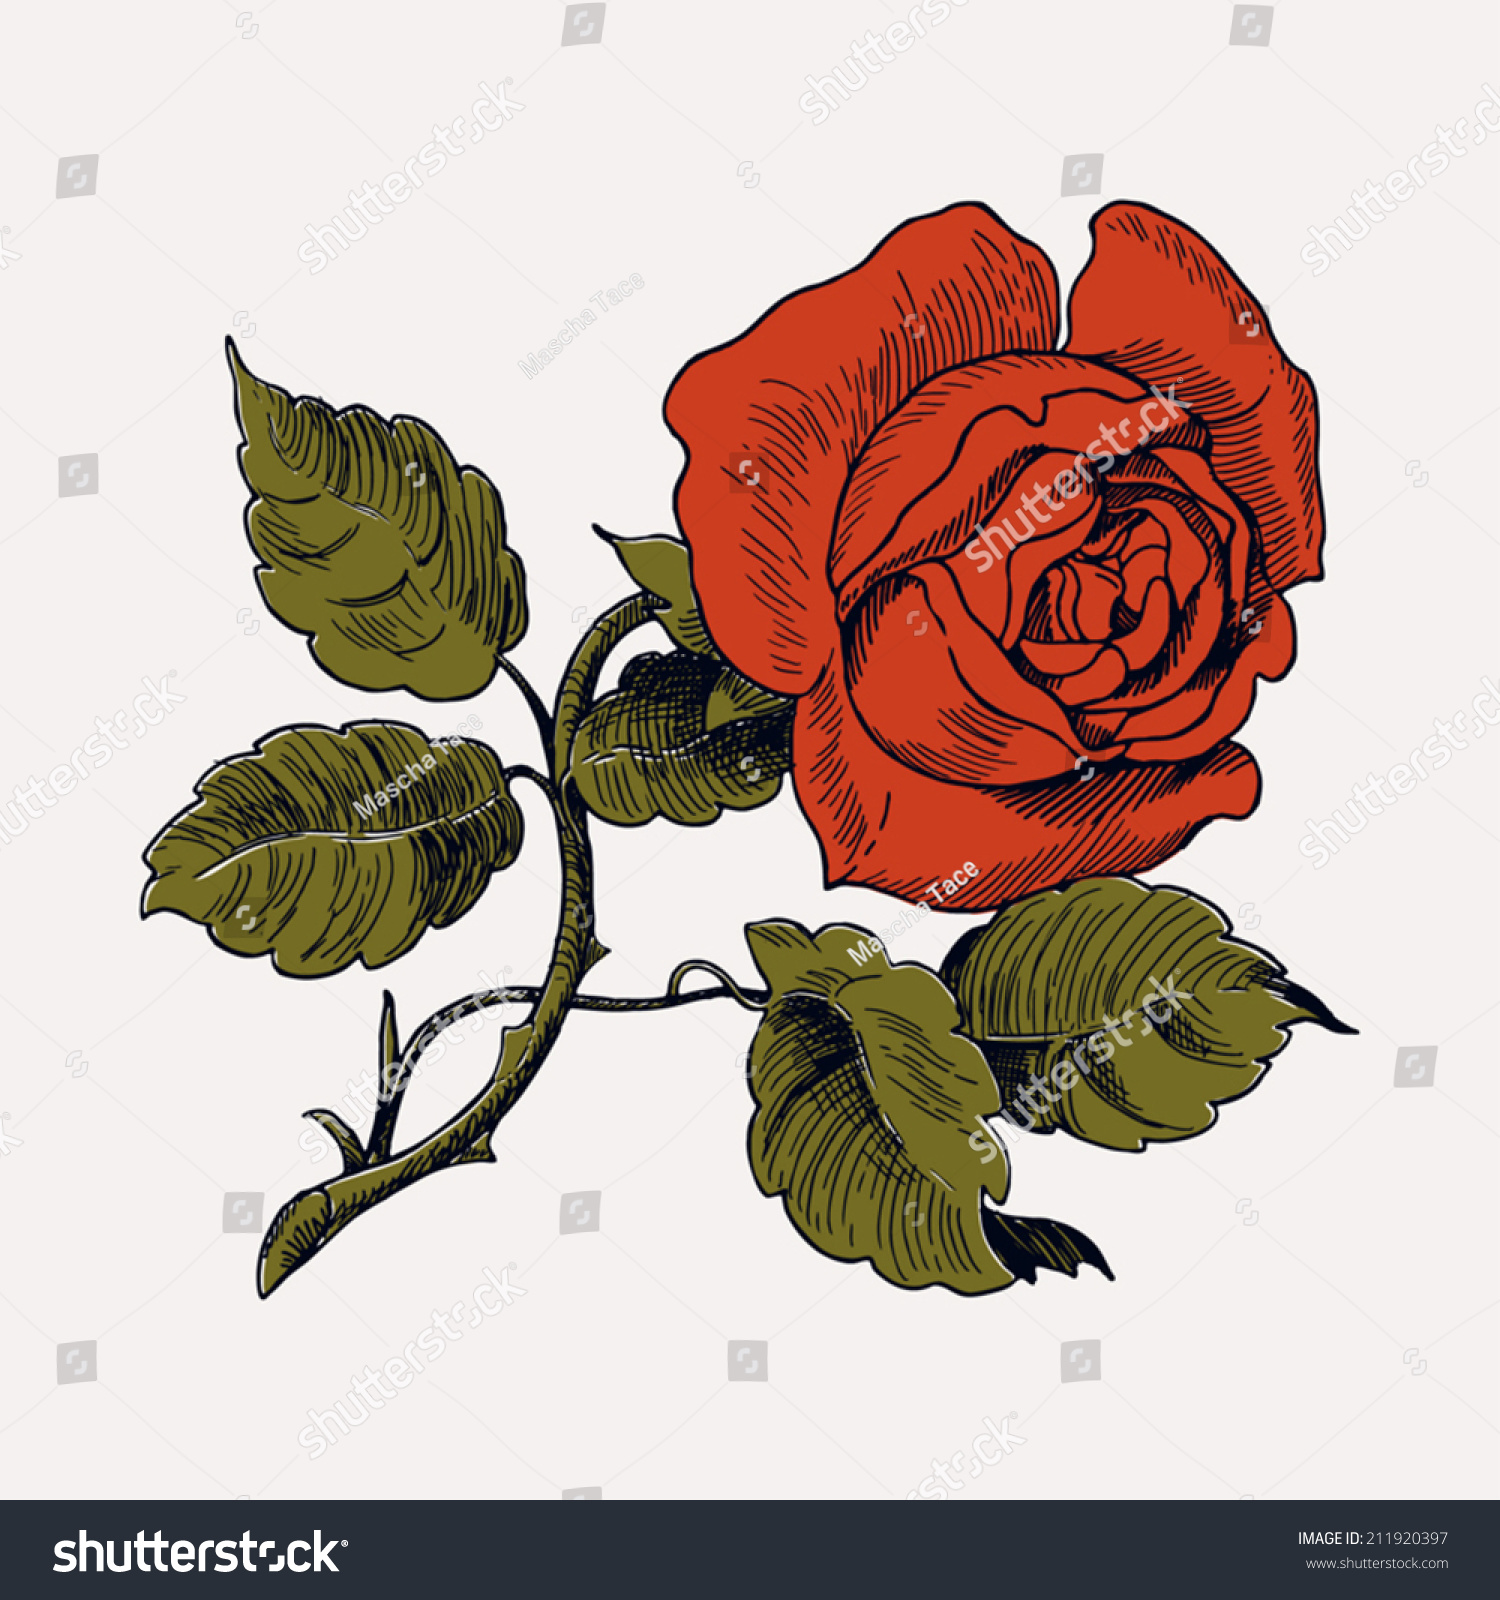 Red Rose With Stem And Thorns